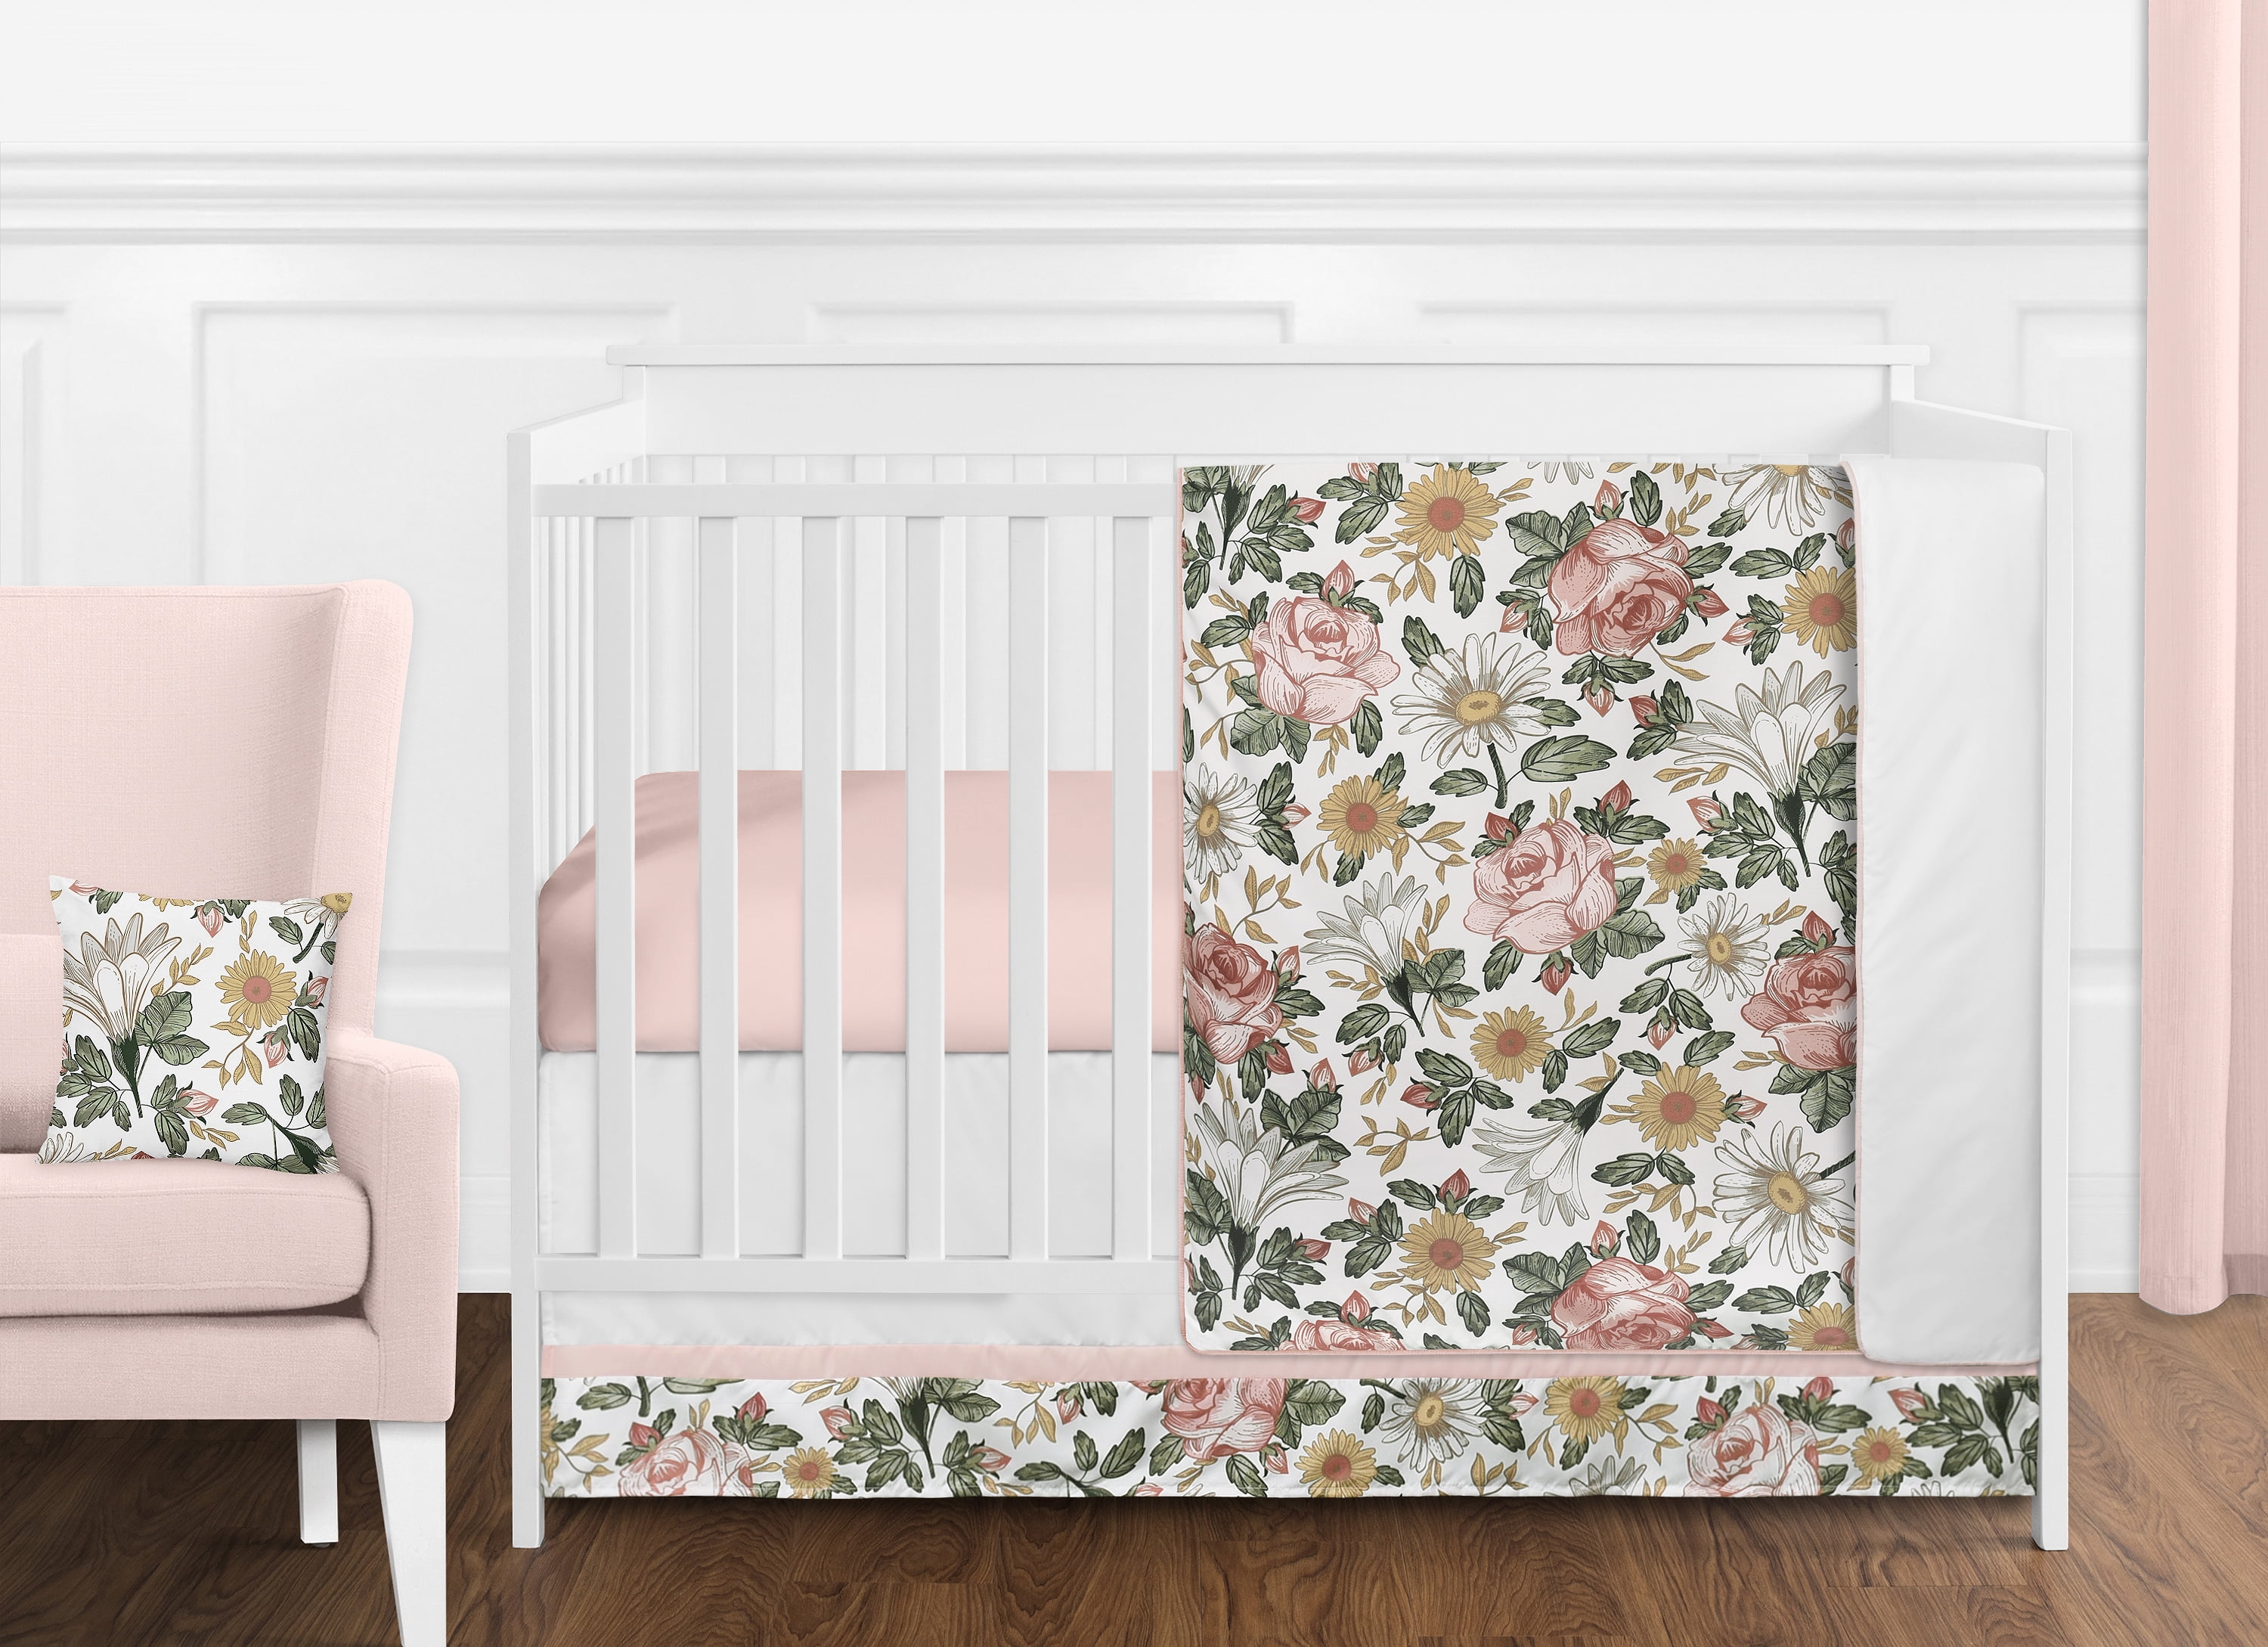 Girl Nursery Bedding Personalized Floral Crib Sheet Crib Sheets Girl Baby Girl Crib Bedding Vintage Floral Crib Bedding Floral Nursery